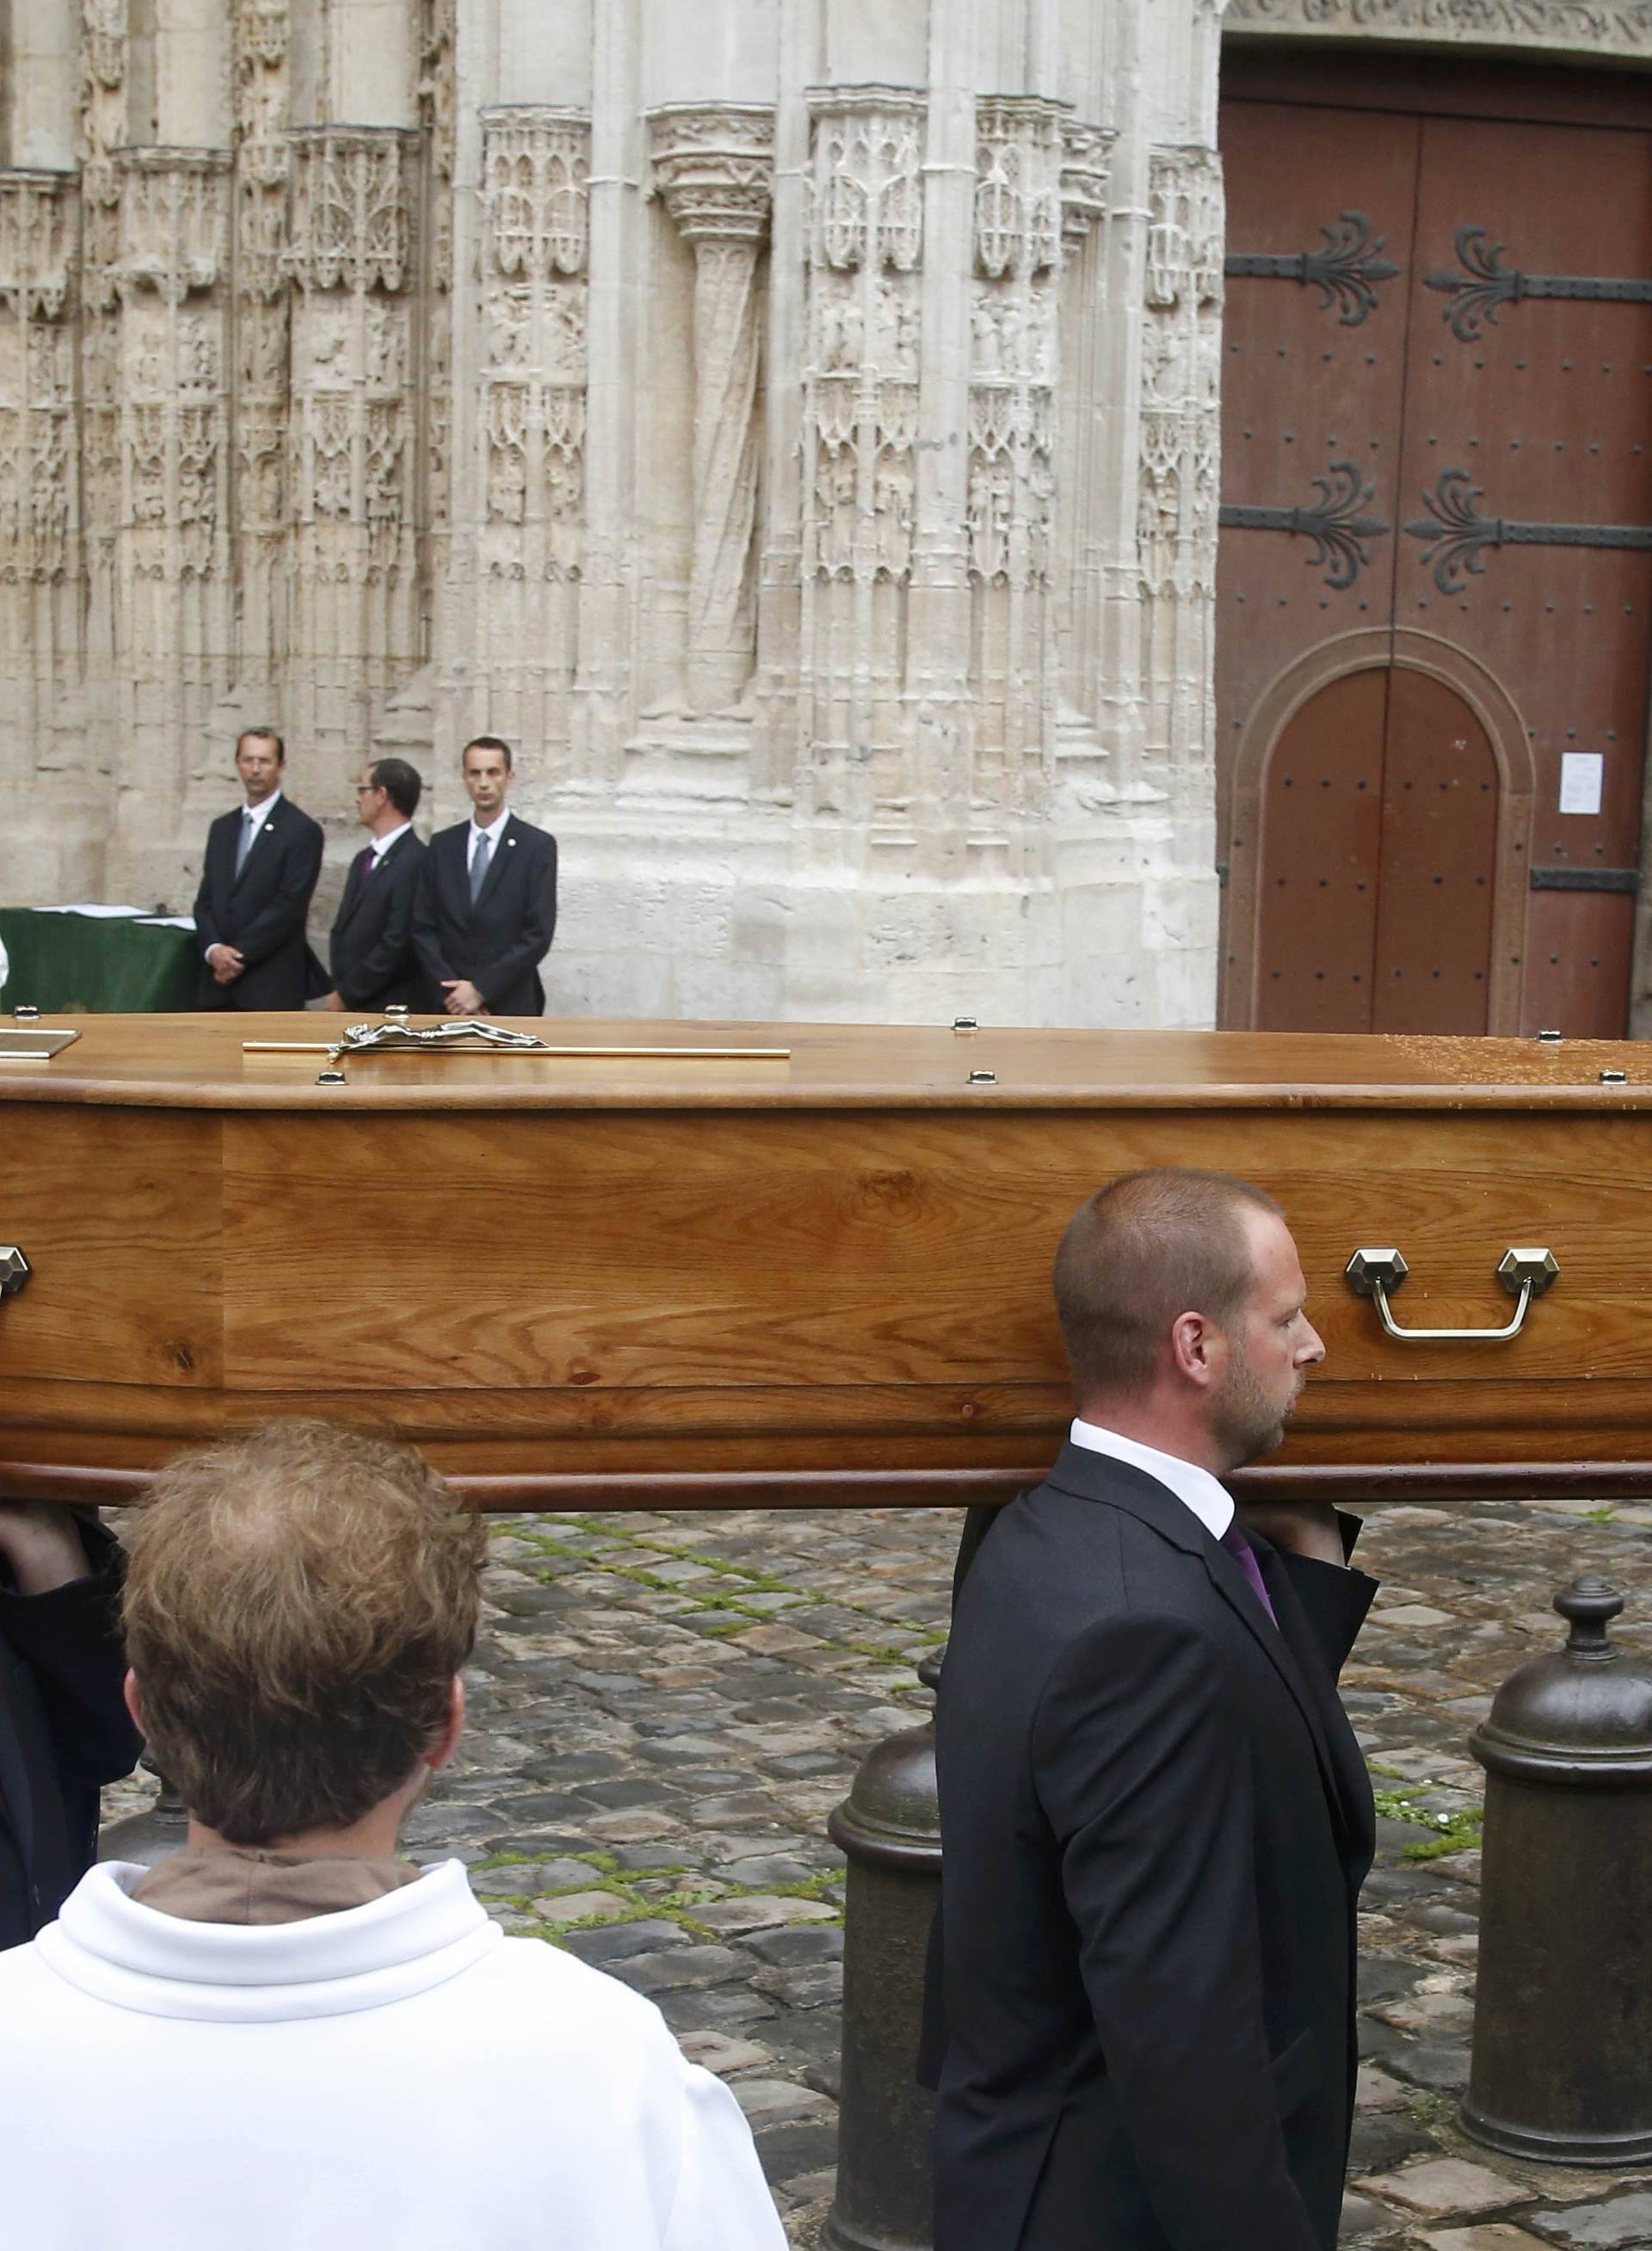 Pallbearers carry the coffin of slain French parish priest Father Jacques Hamel after a funeral ceremony at the Cathedral in Rouen